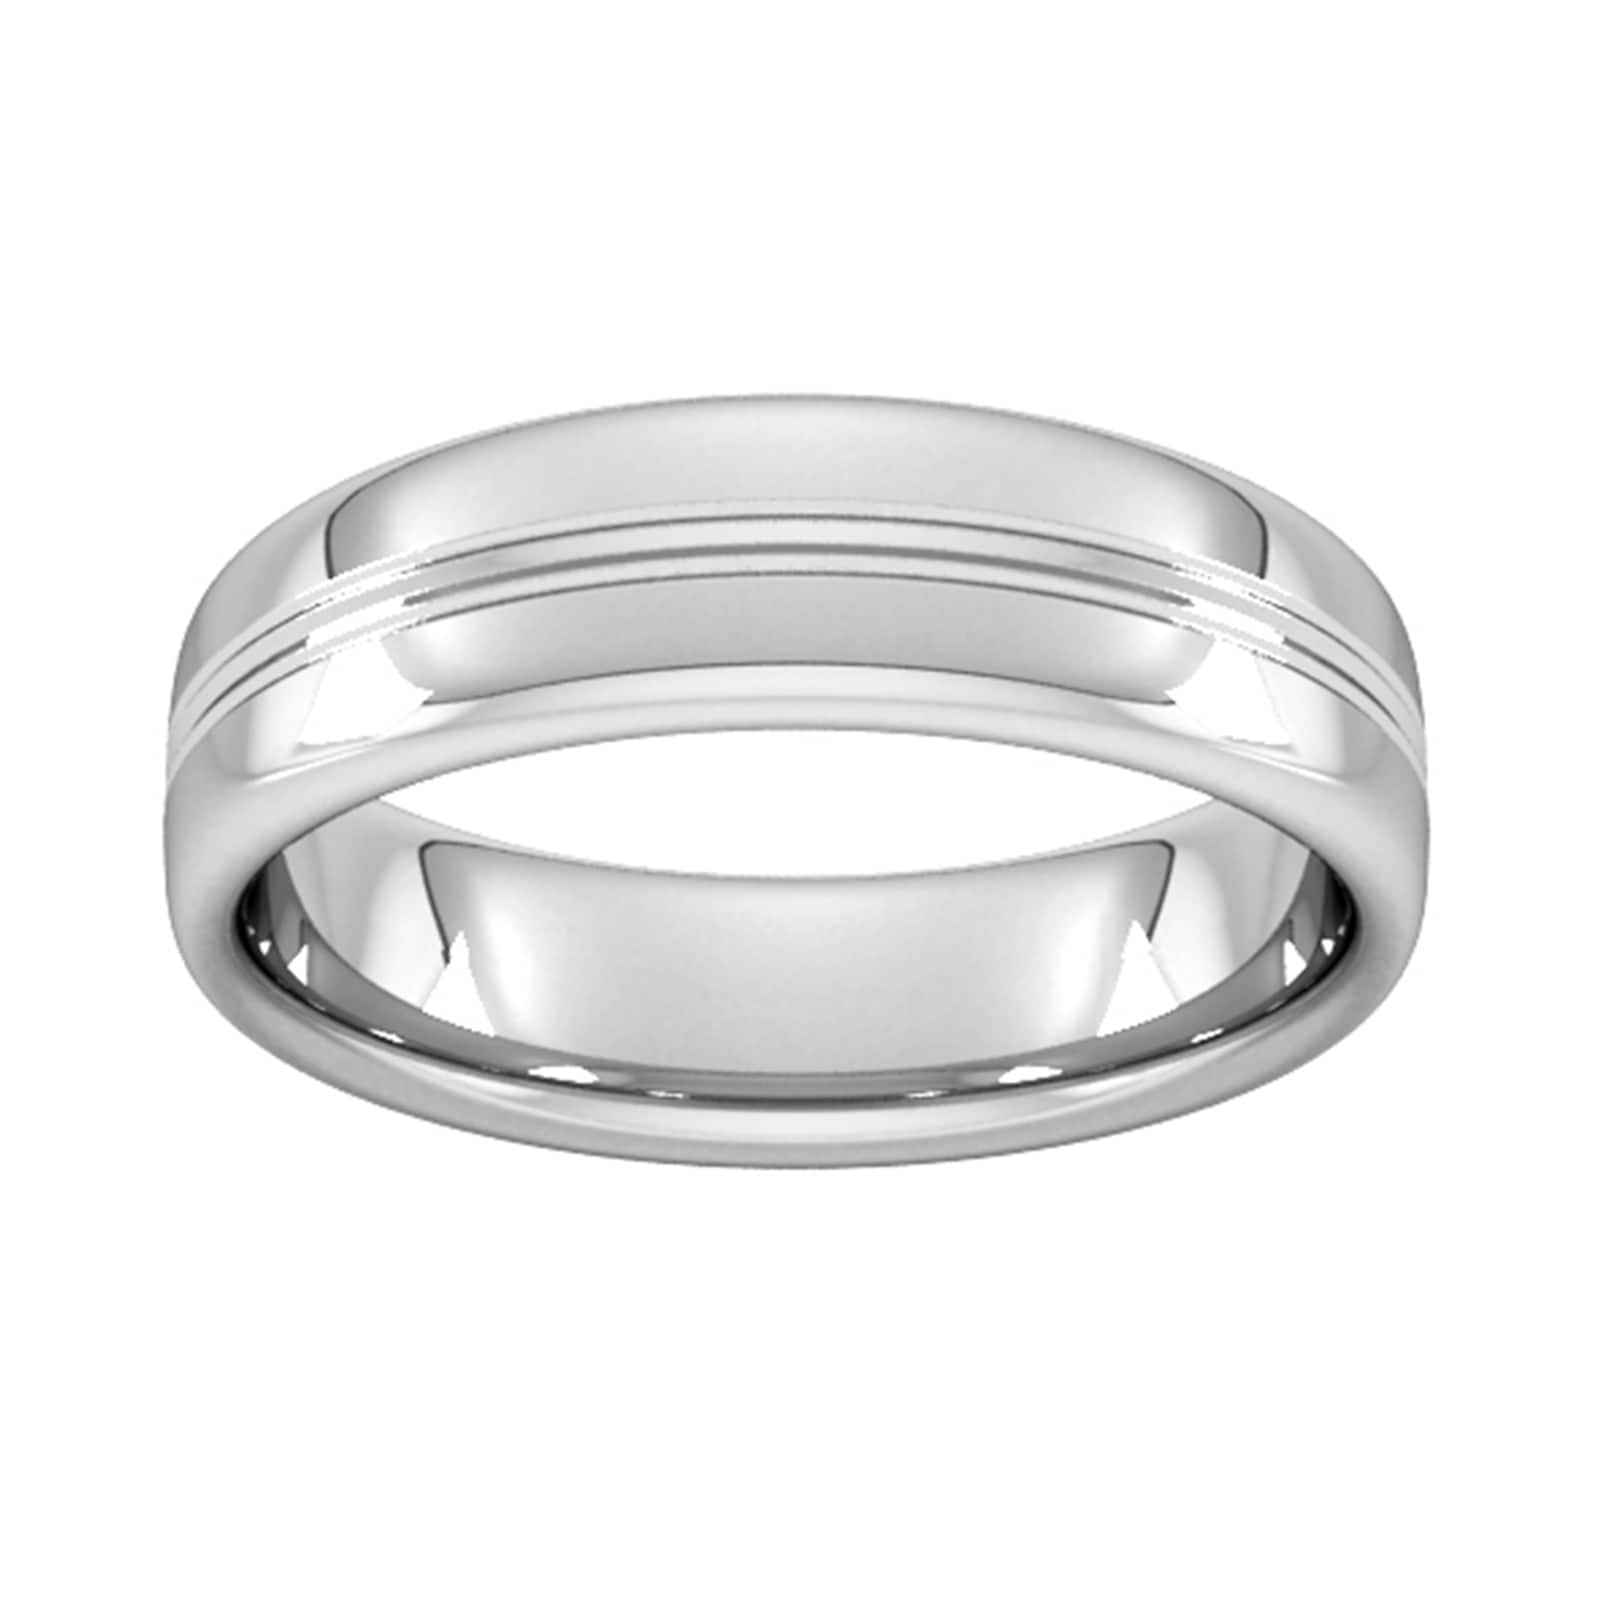 6mm Slight Court Standard Grooved Polished Finish Wedding Ring In 950 Palladium - Ring Size W